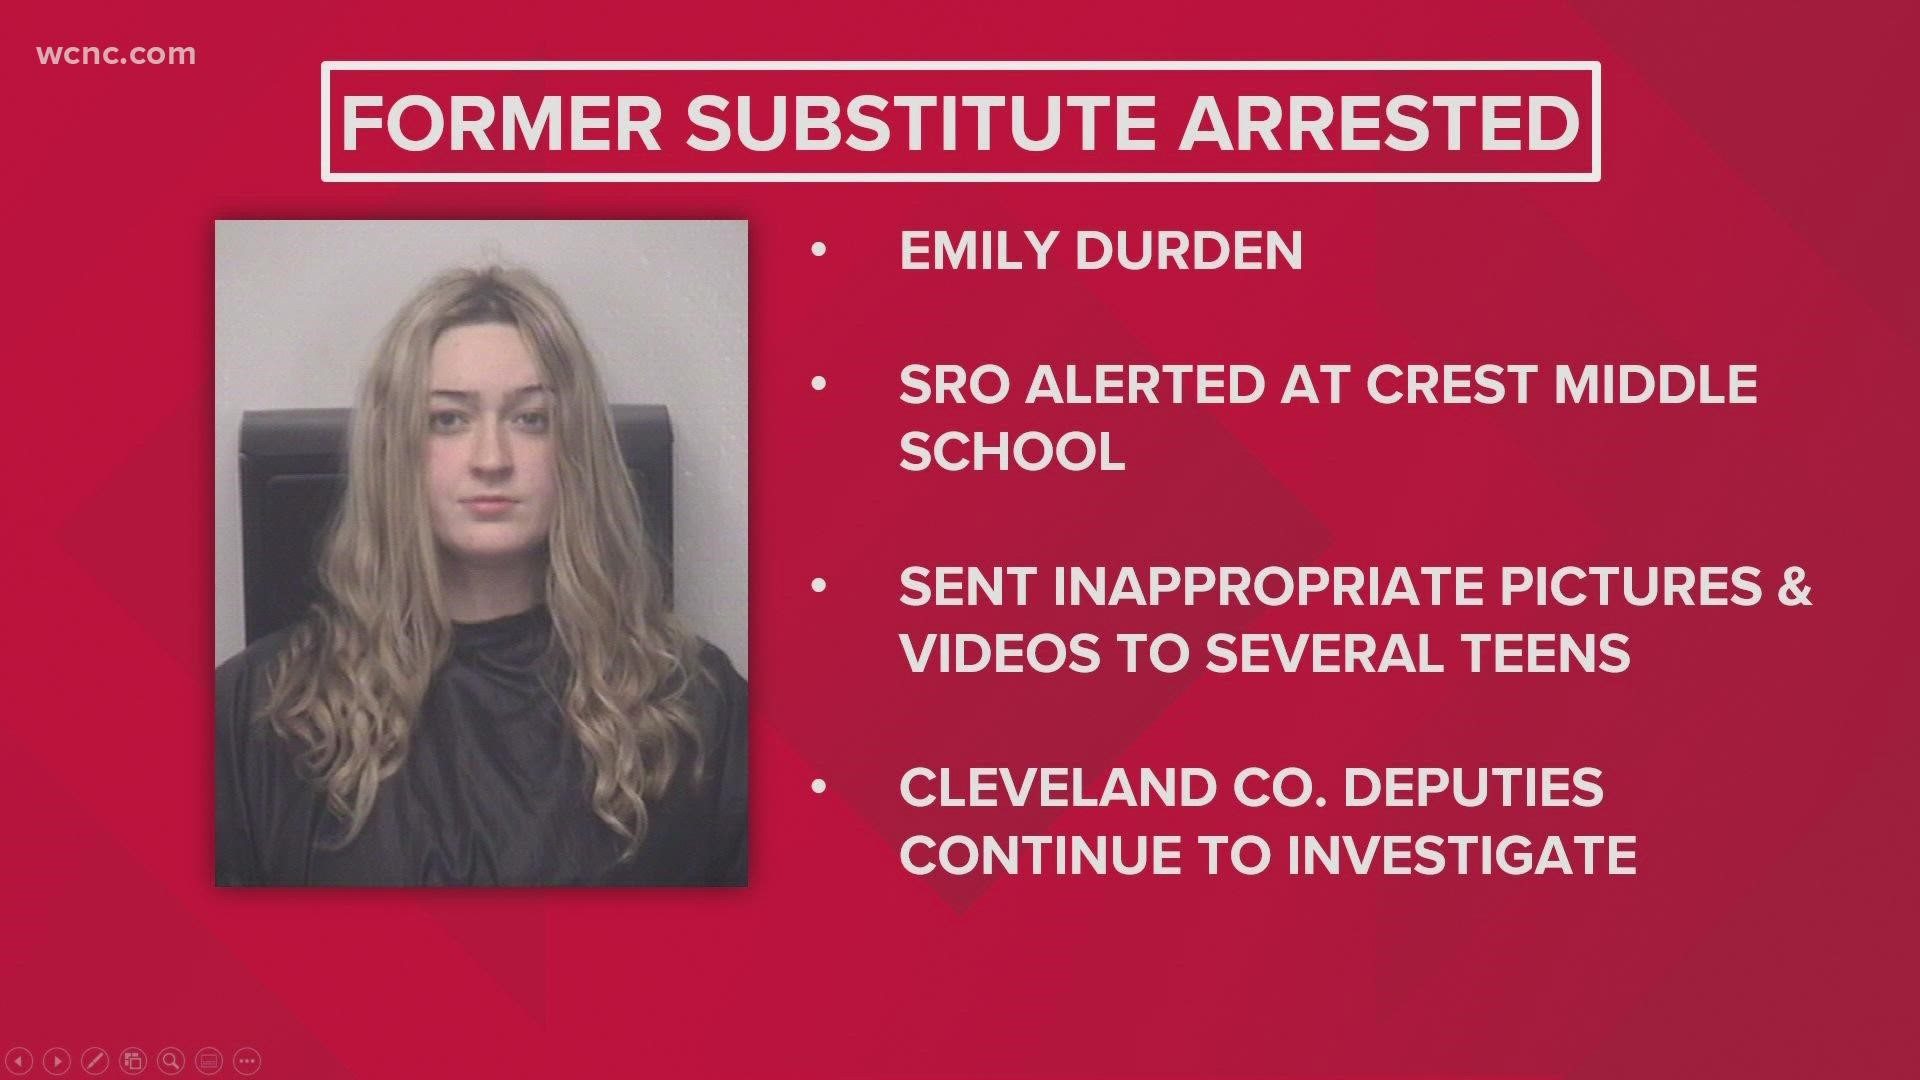 Former sub in Cleveland County arrested: Emily Durden | wcnc.com